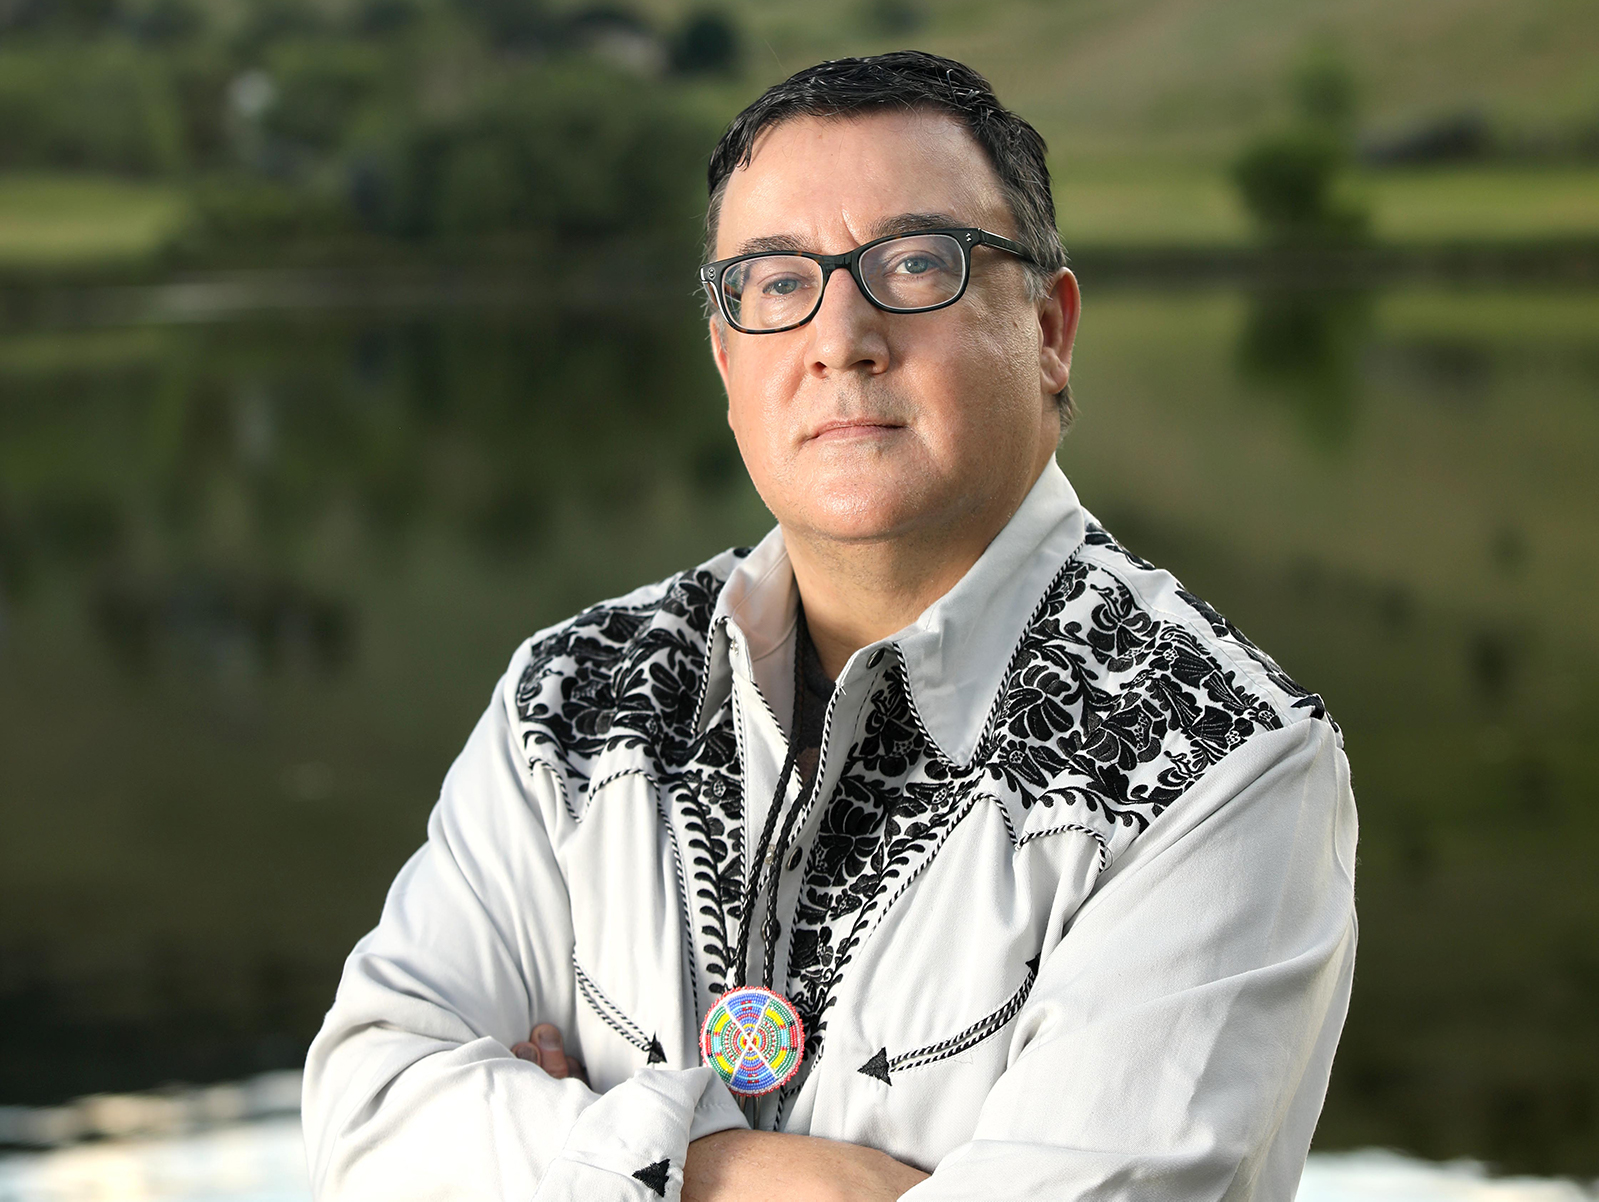 This image shows a man standing outdoors in front of a lake with a blurred background of greenery and hills. He is wearing glasses and a light-colored shirt with intricate black embroidery. His arms are crossed, and he has a serious expression on his face. He also wears a colorful medallion around his neck.